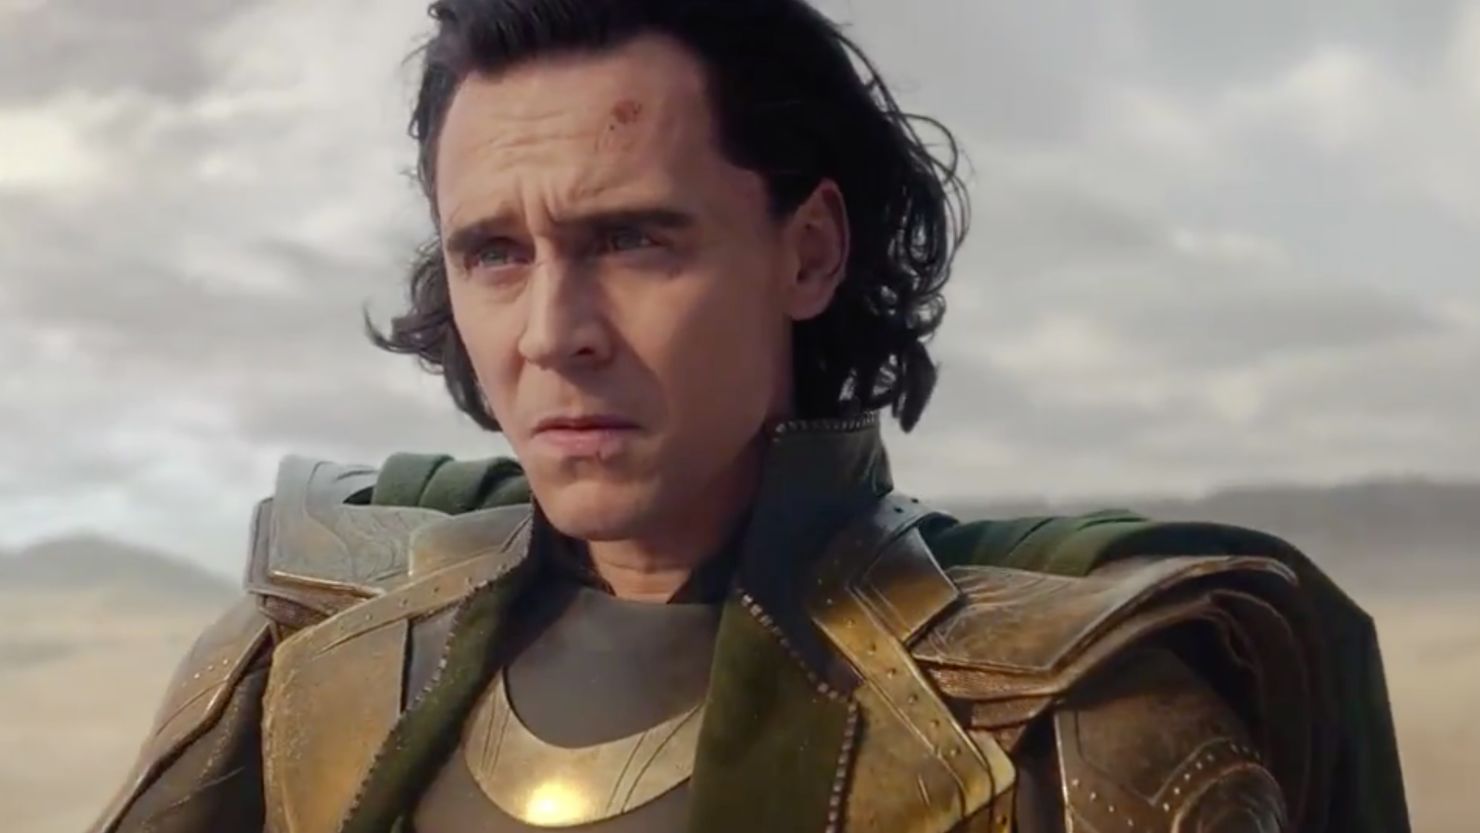 Your first look at Disney+'s "Loki" has arrived.